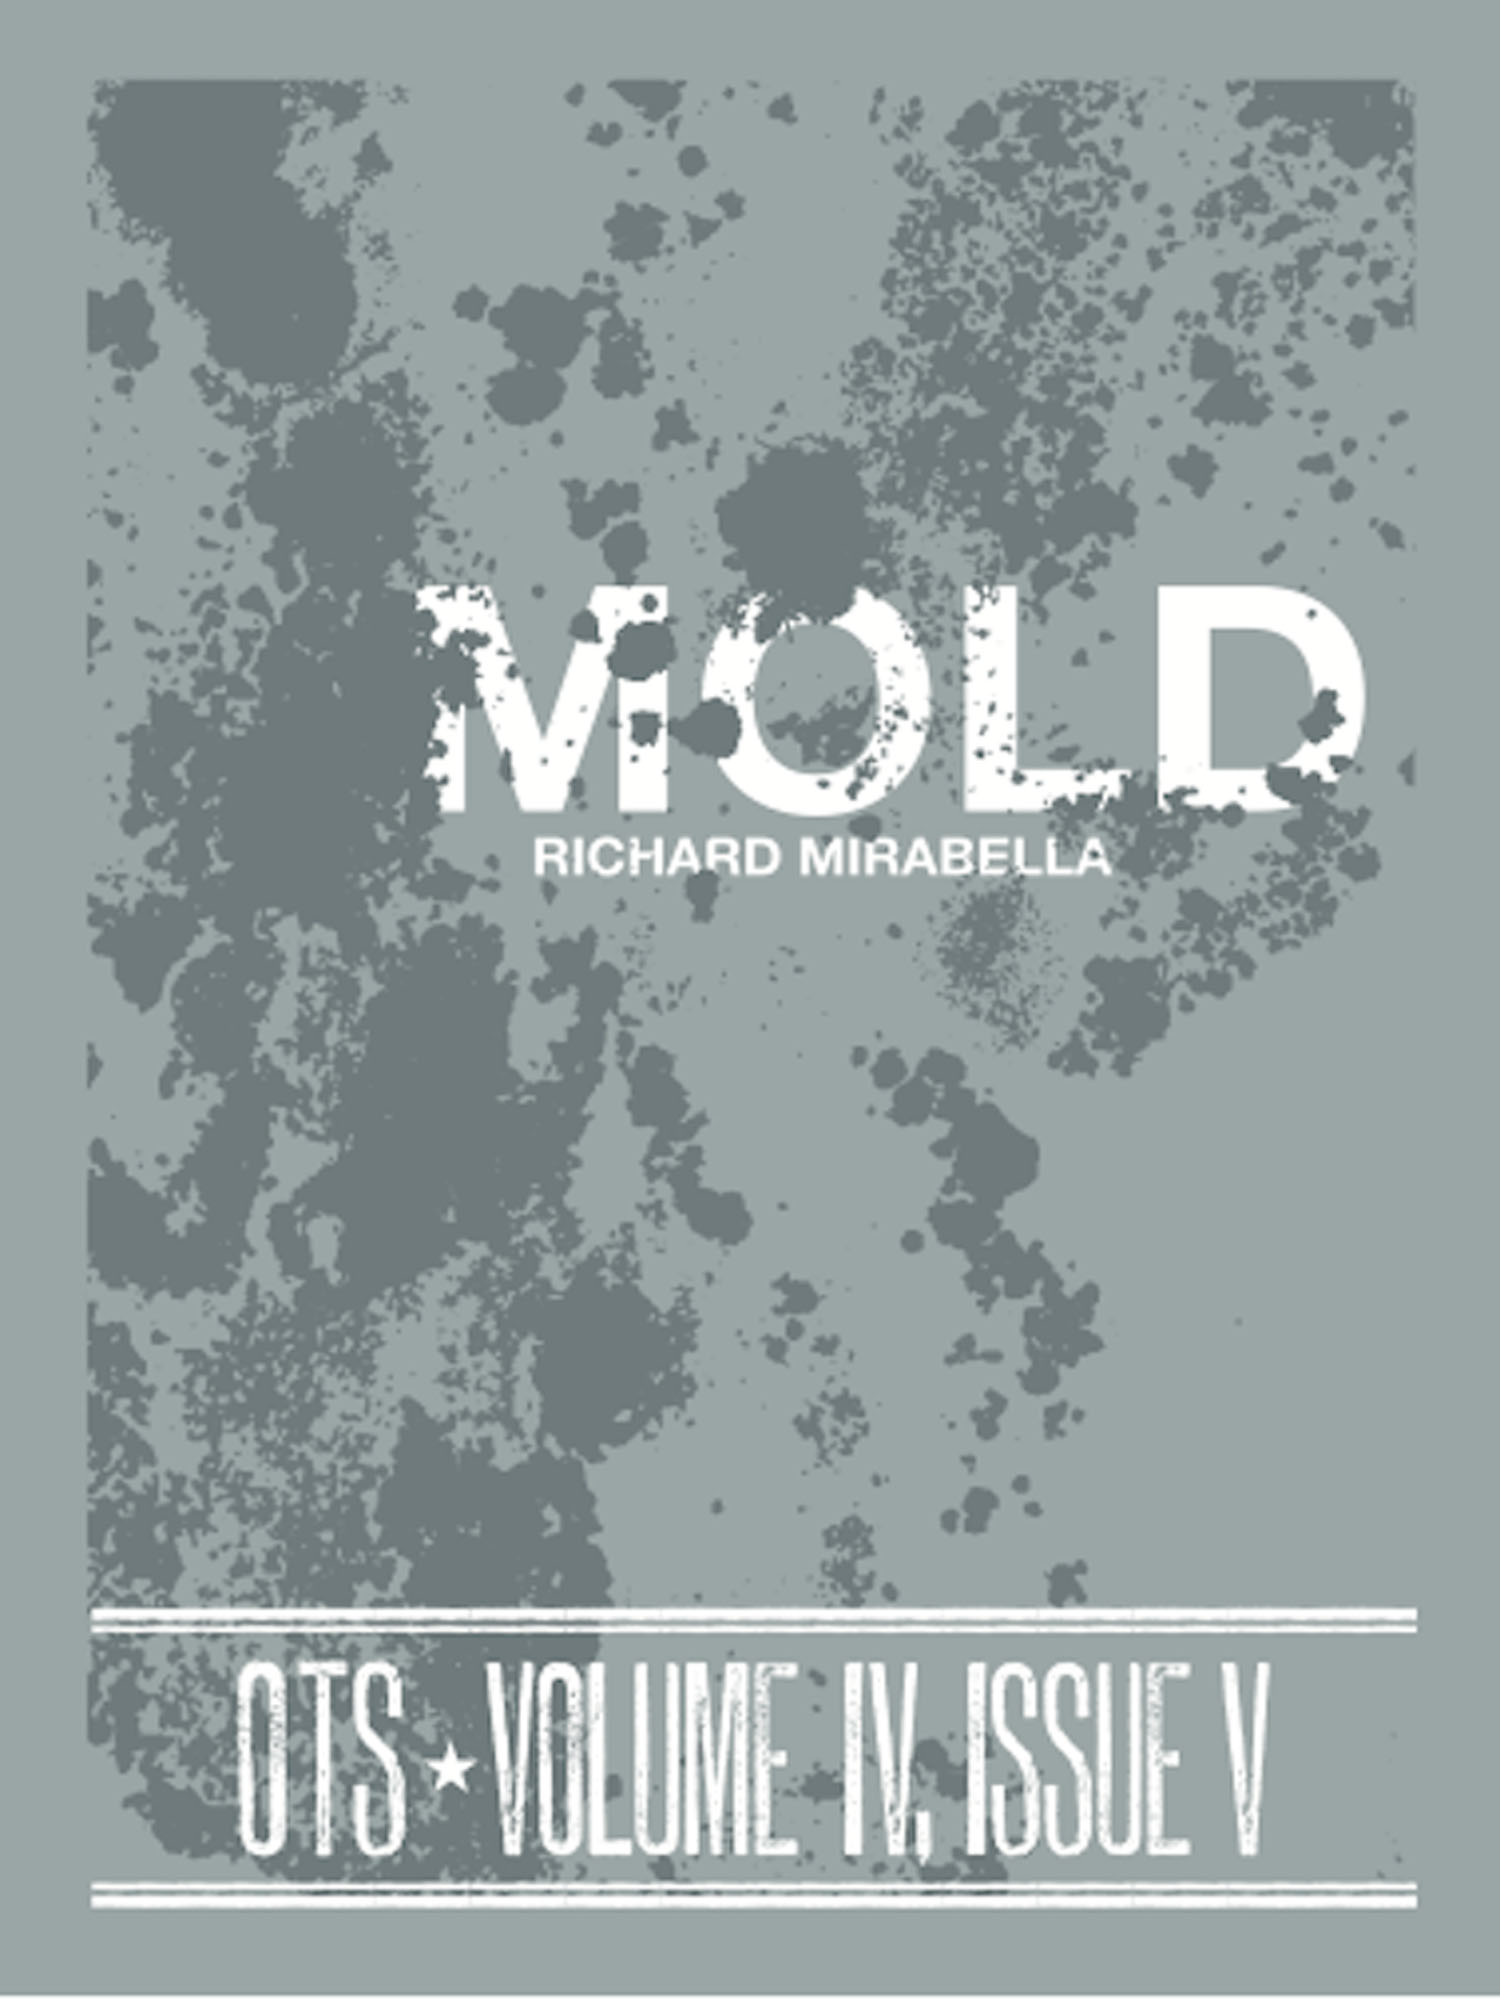 Mold Cover